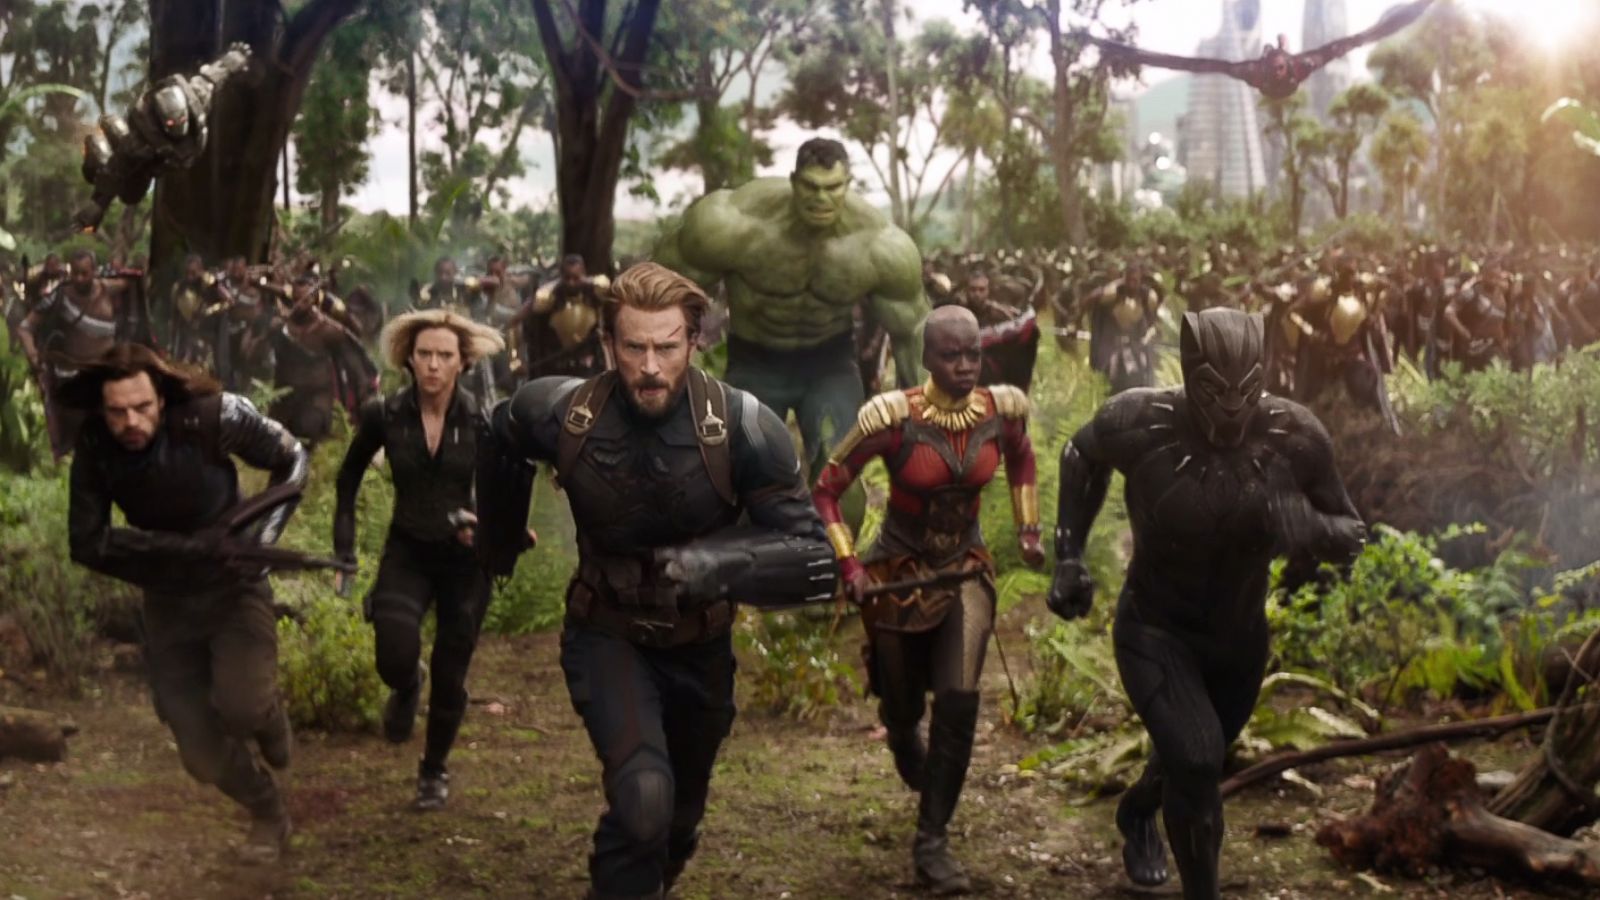 PHOTO: Characters from the Avengers are seen in a still image from the trailer for Marvel's, "Avengers: Infinity War."